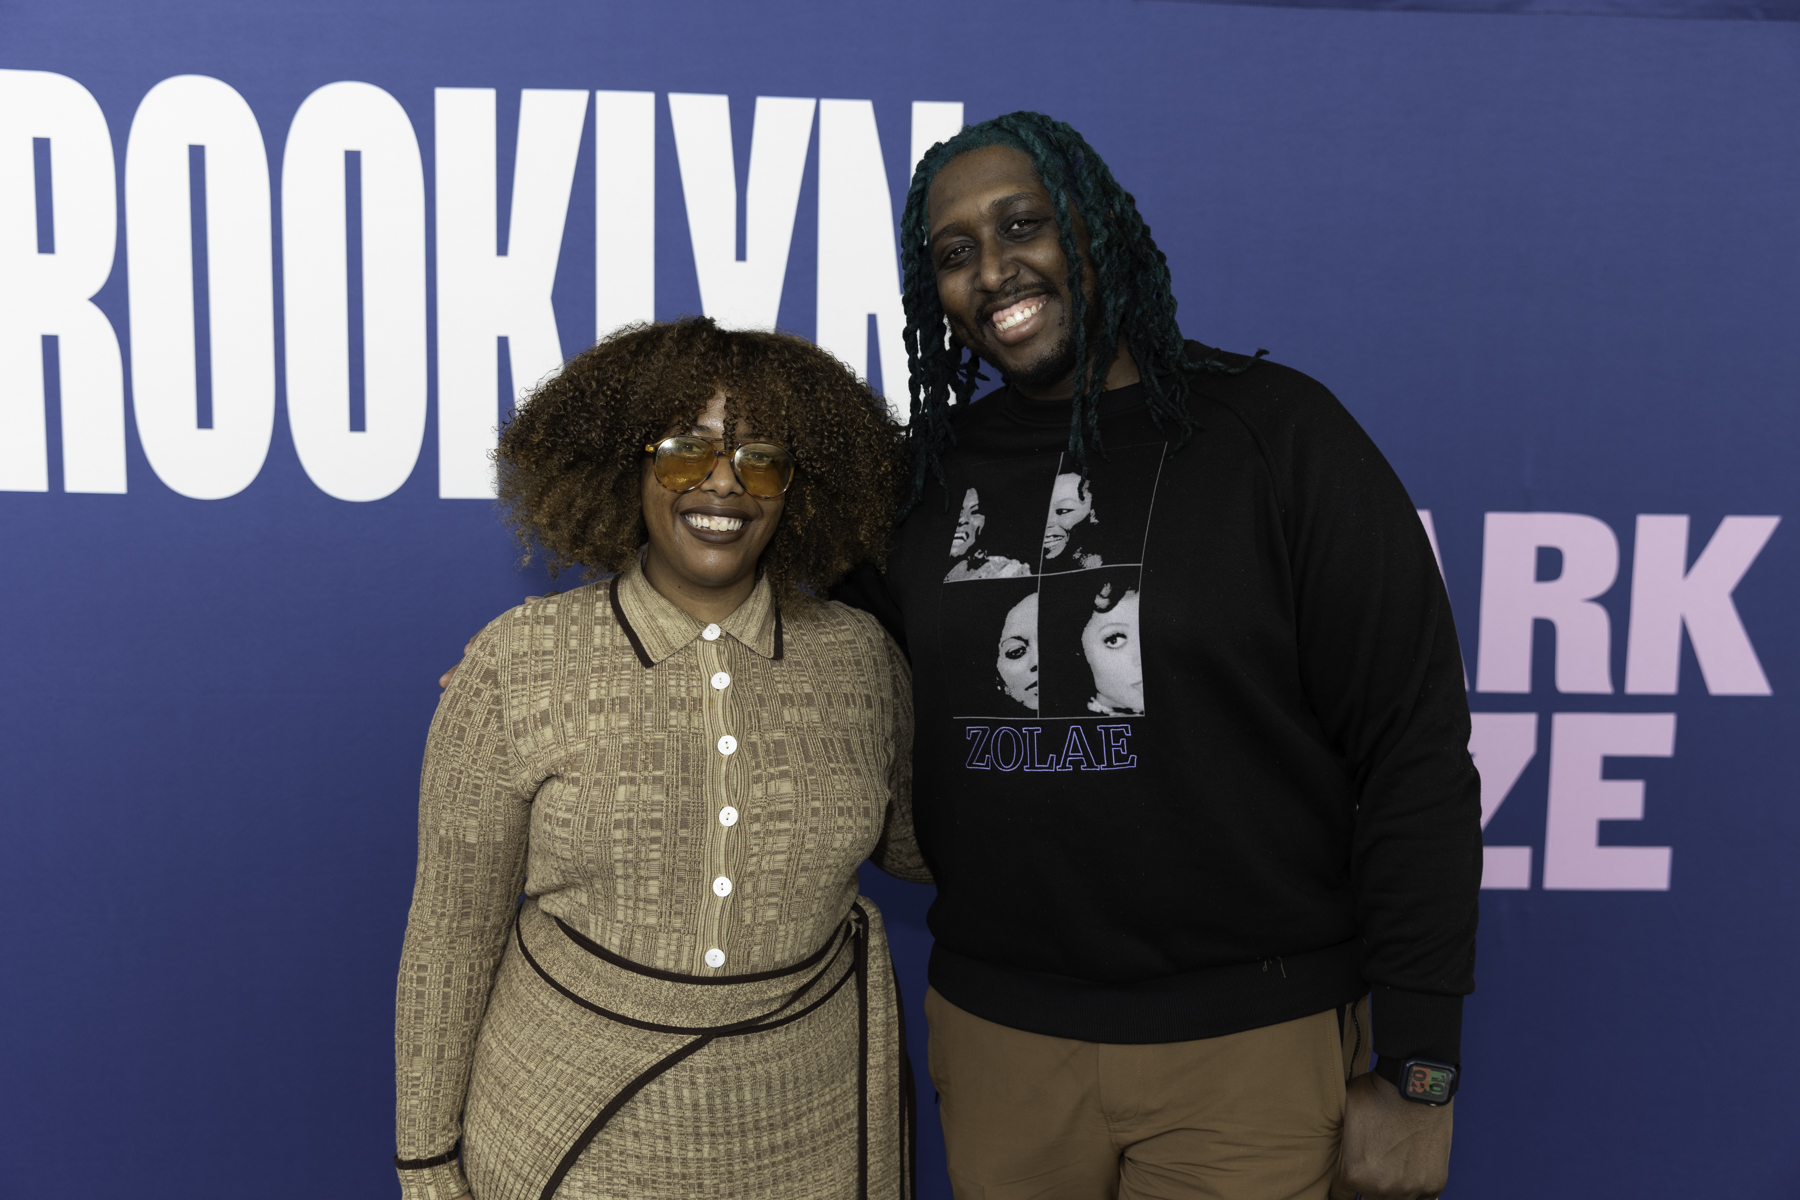 Two individuals smiling for a photo at a "brooklyn talks" event.